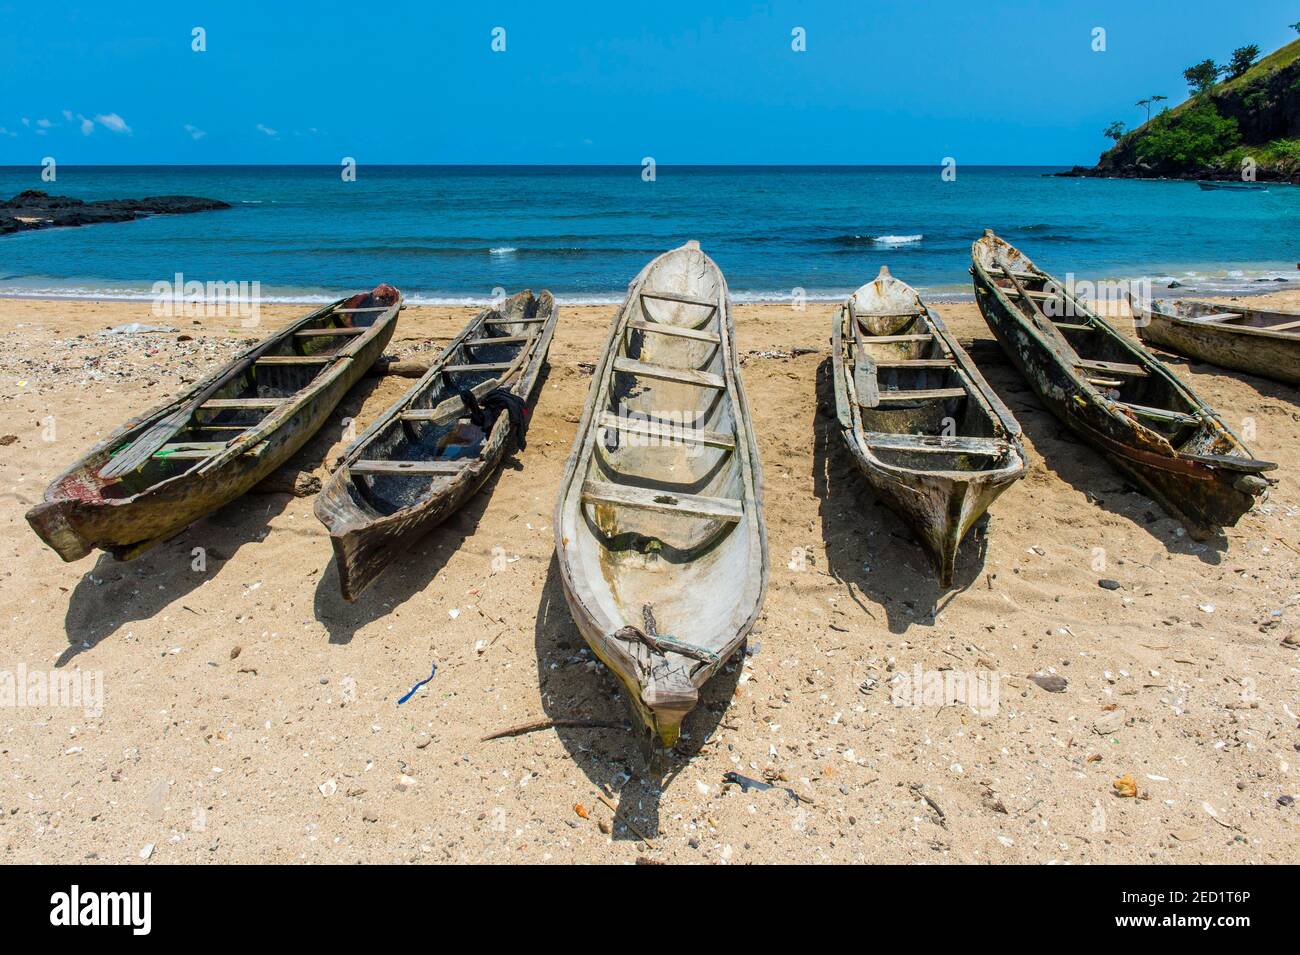 Wooden fishing boats in the fishing village Morro Peixe in northern Sao Tome, Sao Tome and Principe, Atlantic ocean Stock Photo